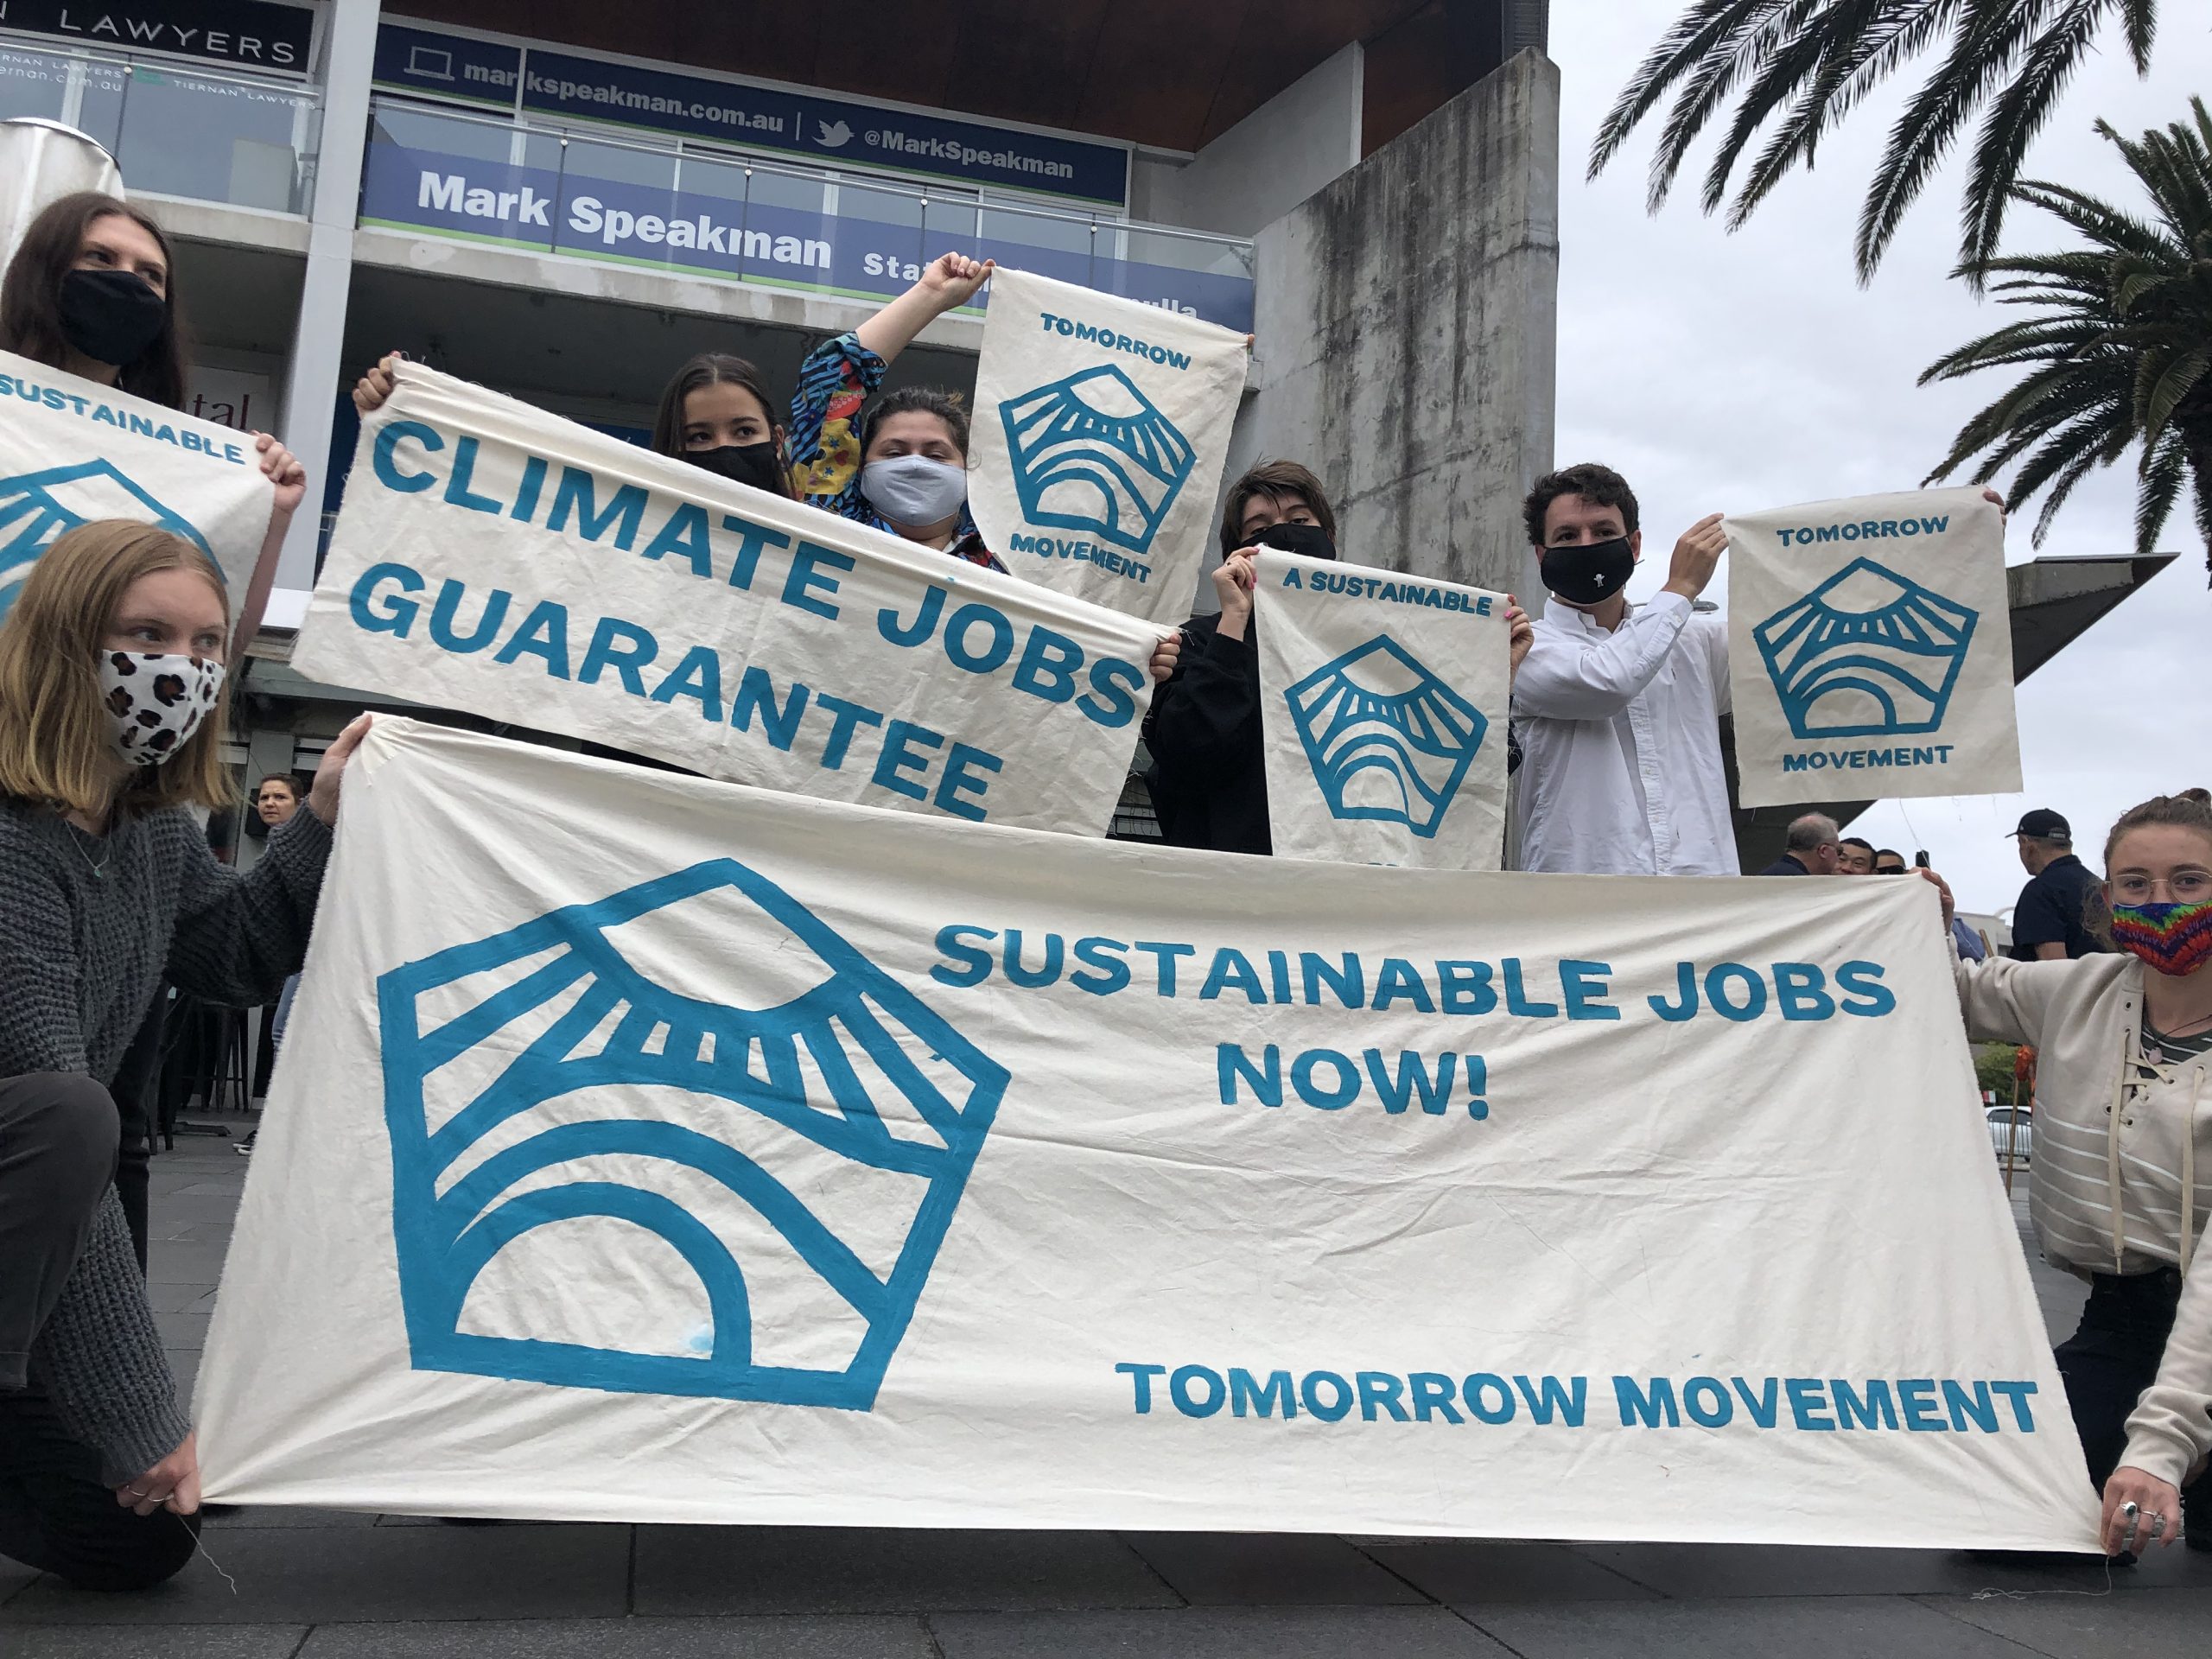 Tomorrow Movement with banners campaigning for Climate Jobs